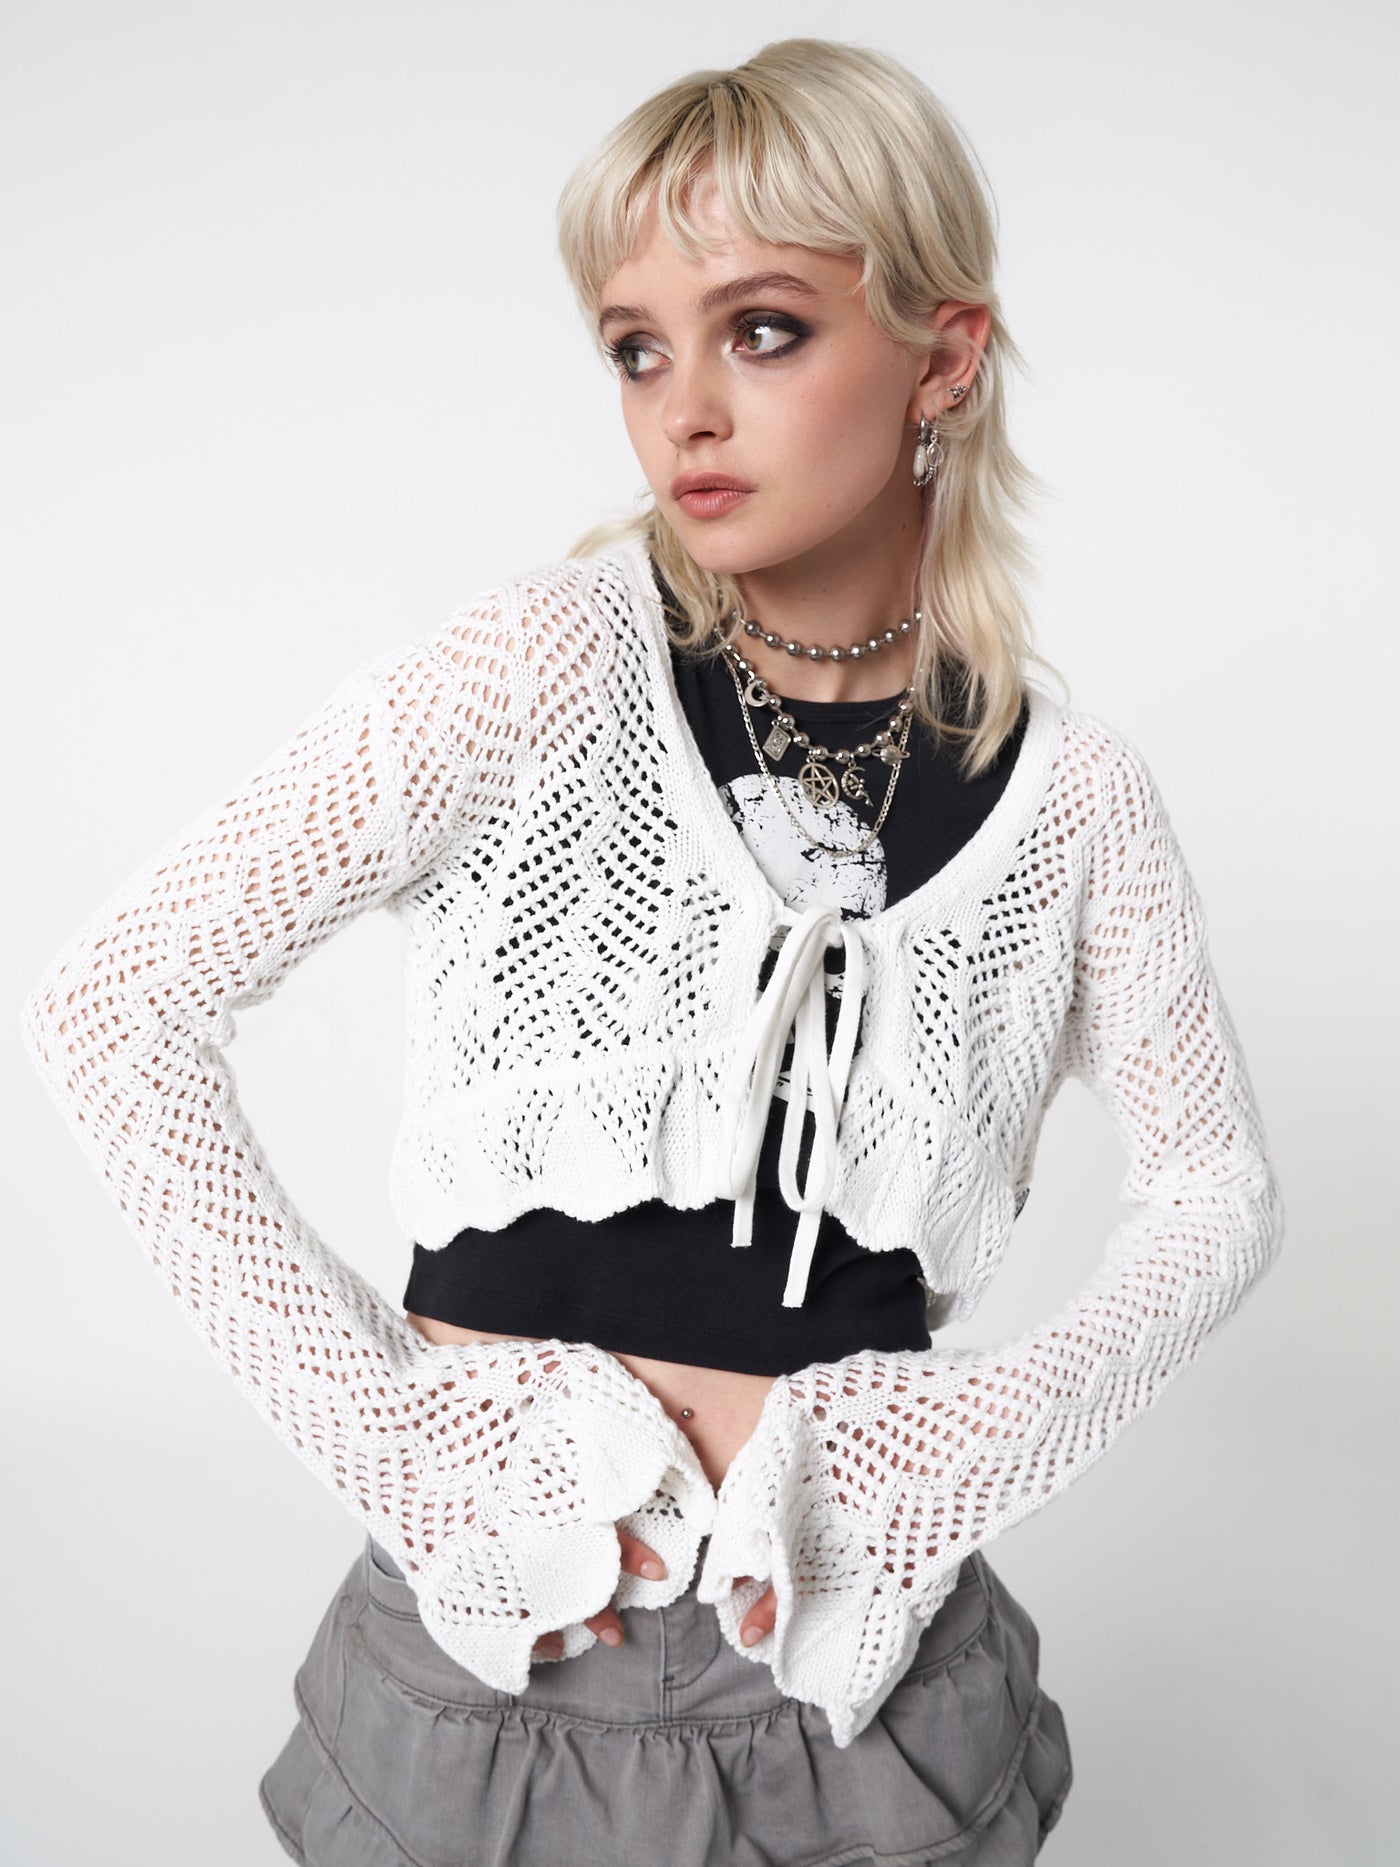 Tie front cardigan in white featuring crochet style knit pattern